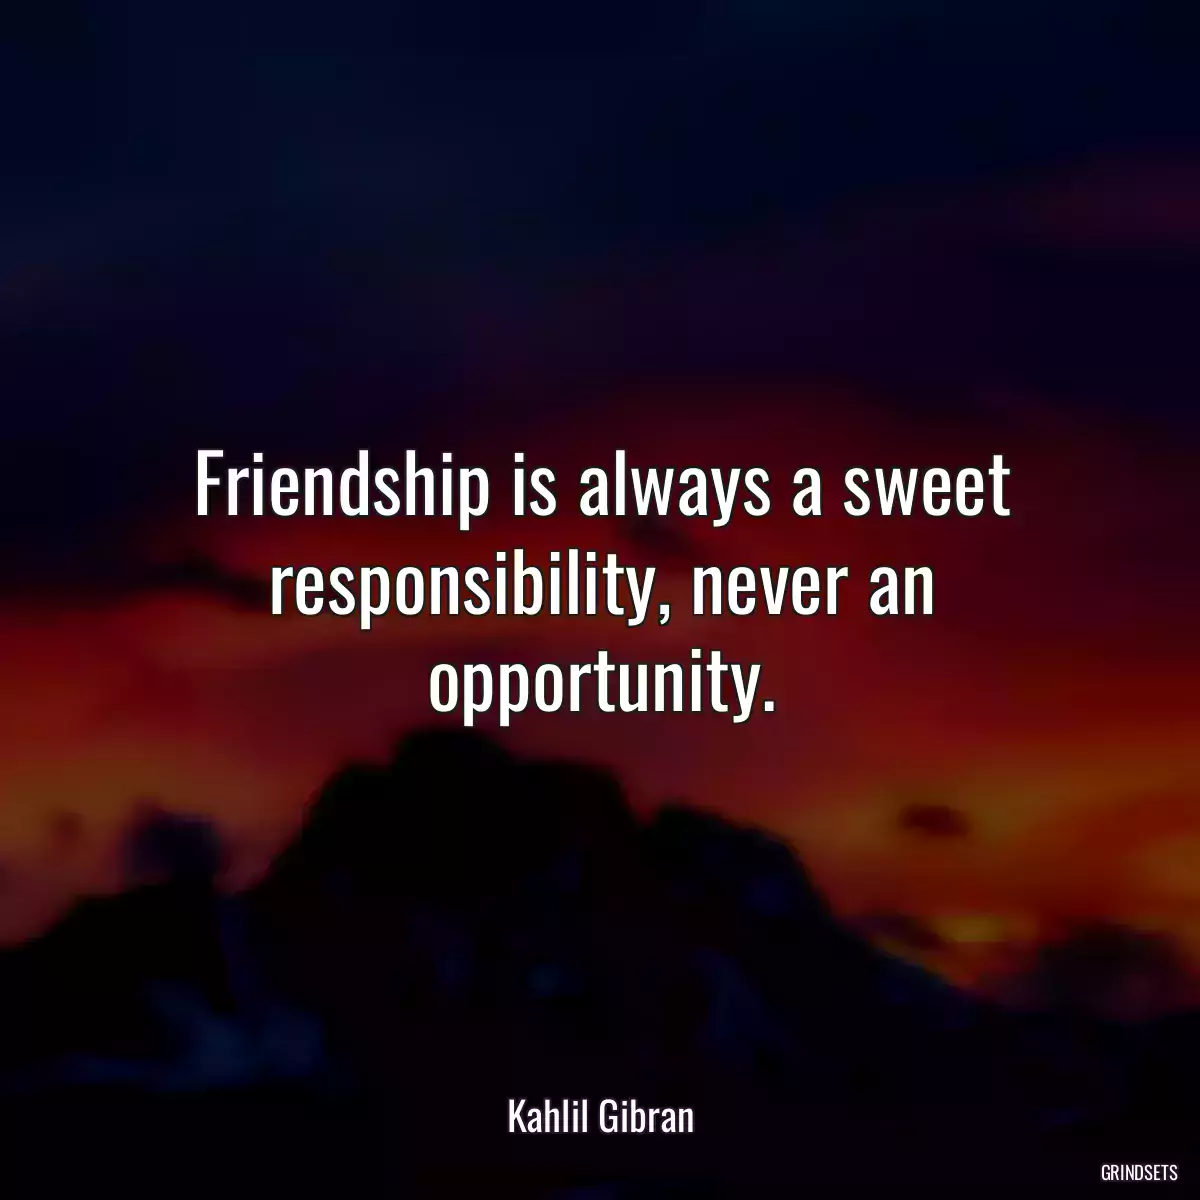 Friendship is always a sweet responsibility, never an opportunity.